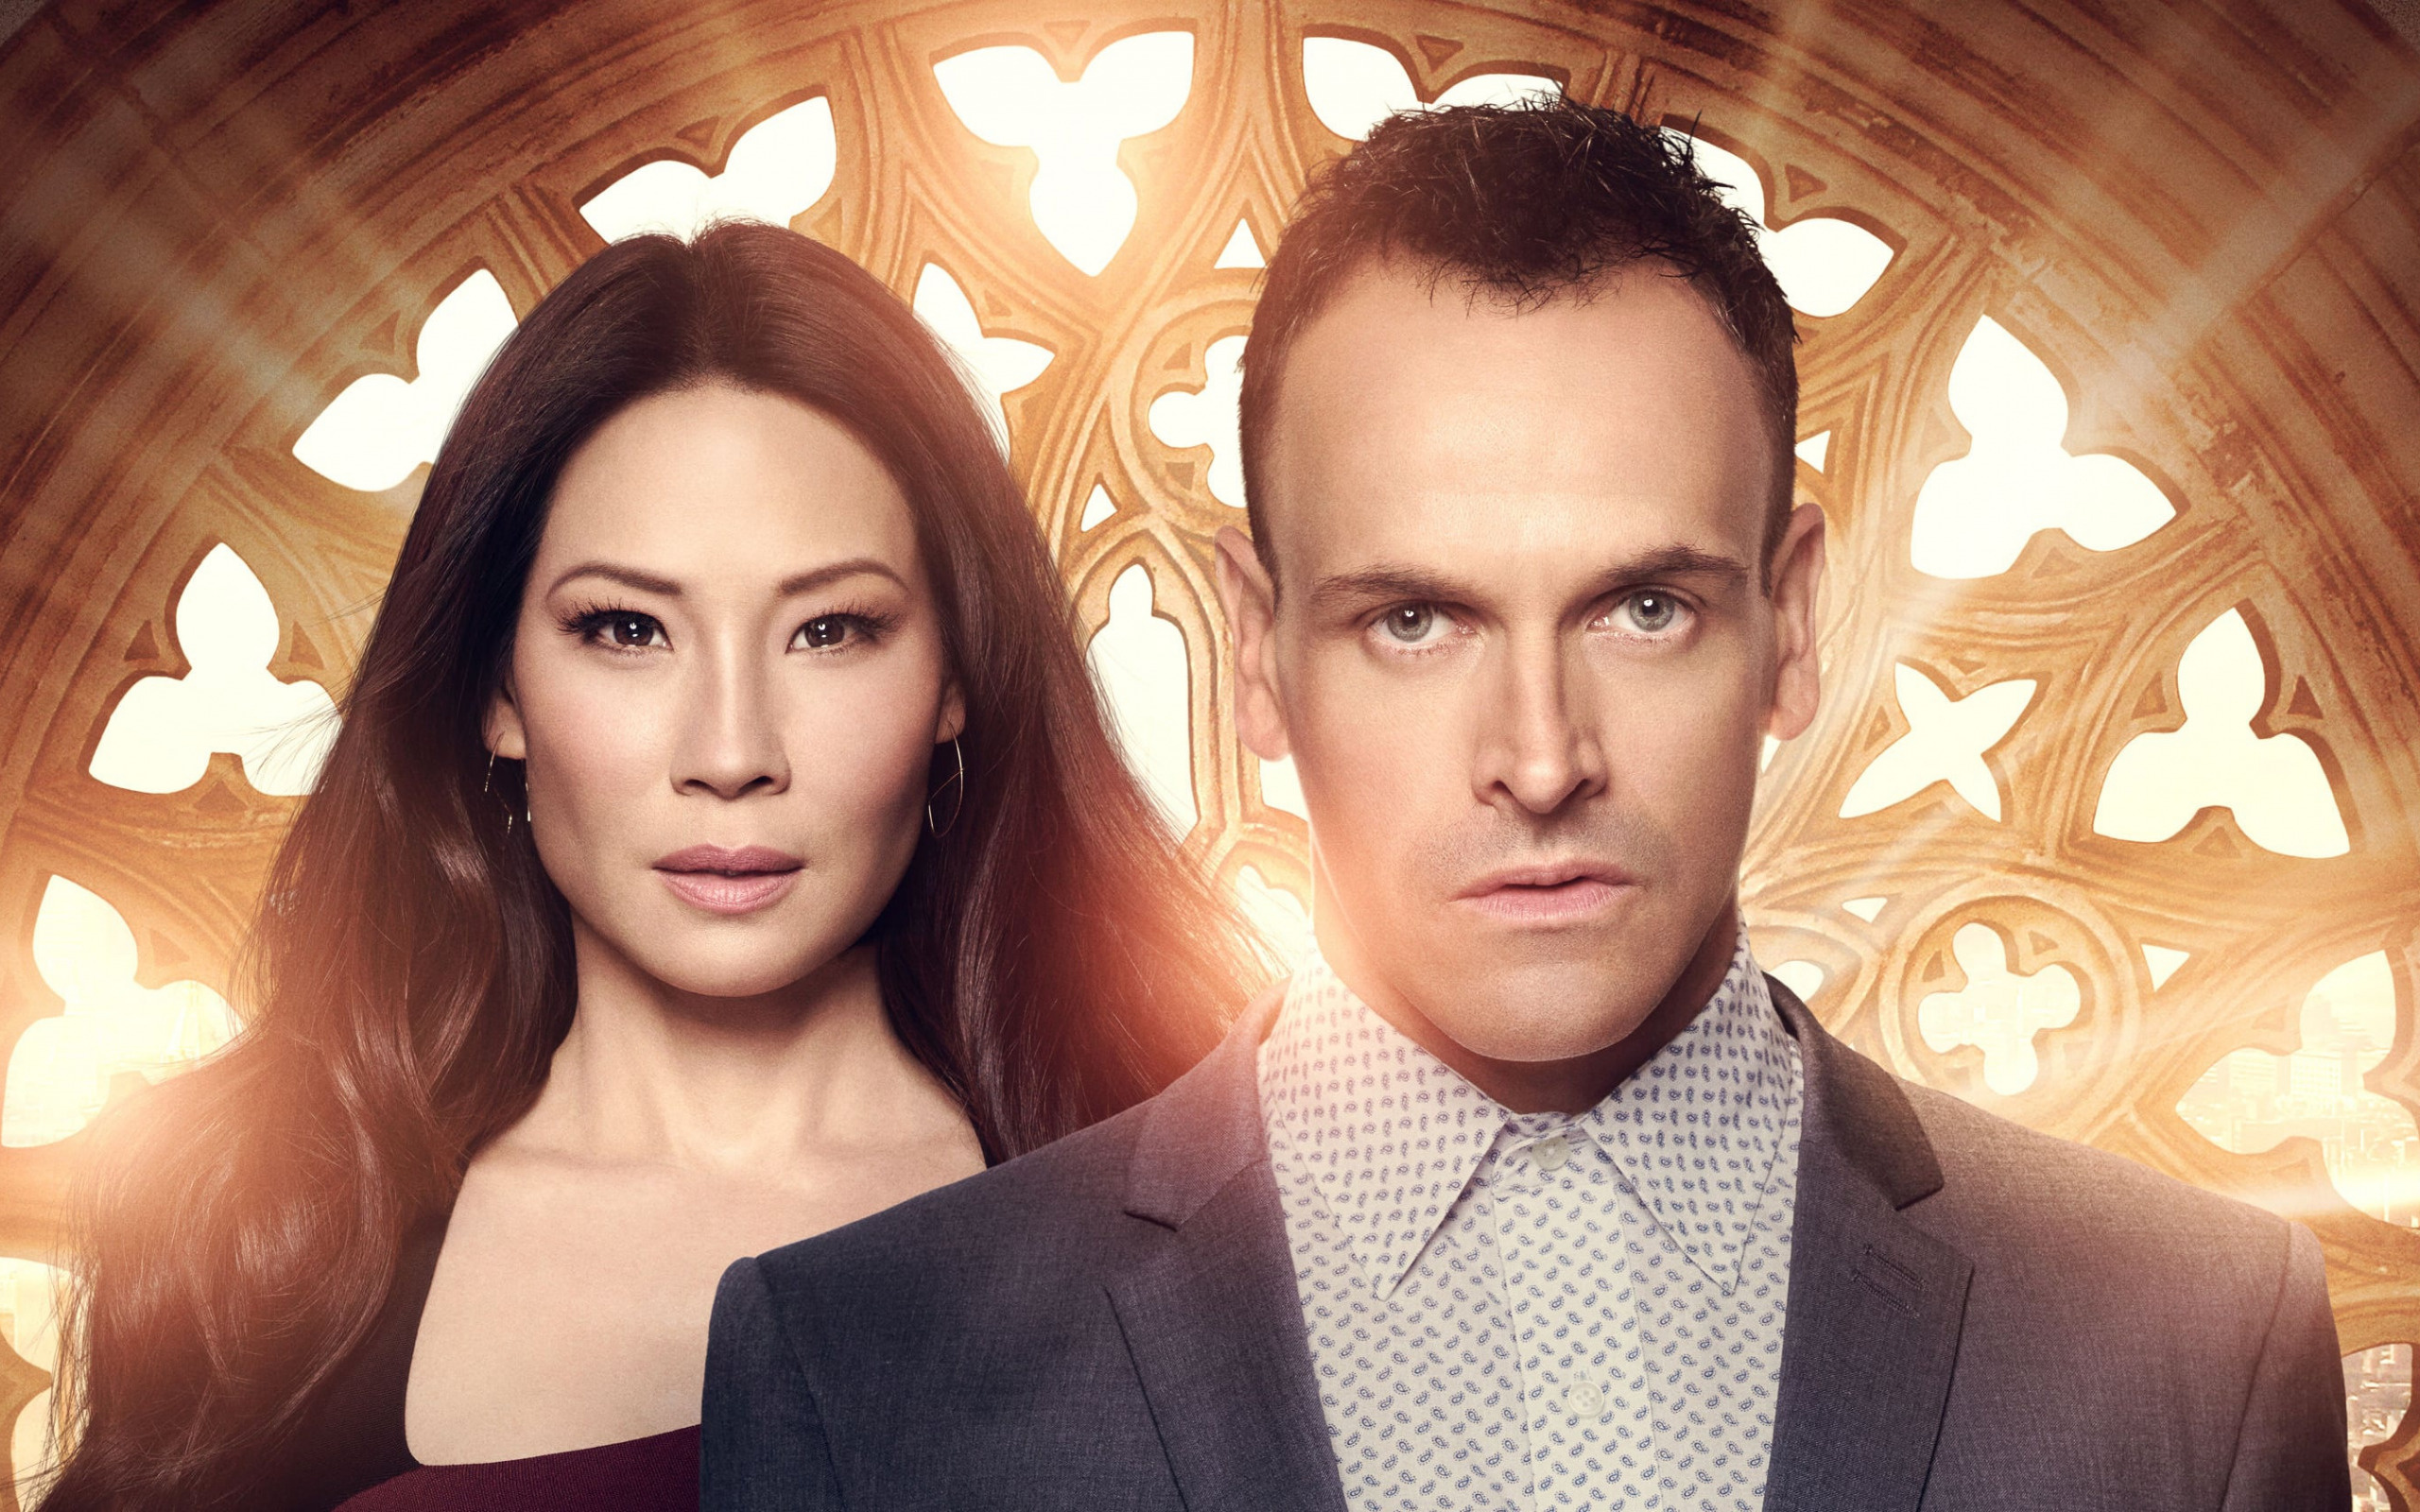 Lucy Liu: Elementary, Main characters, Jonny Lee Miller, American detective television series. 2560x1600 HD Wallpaper.